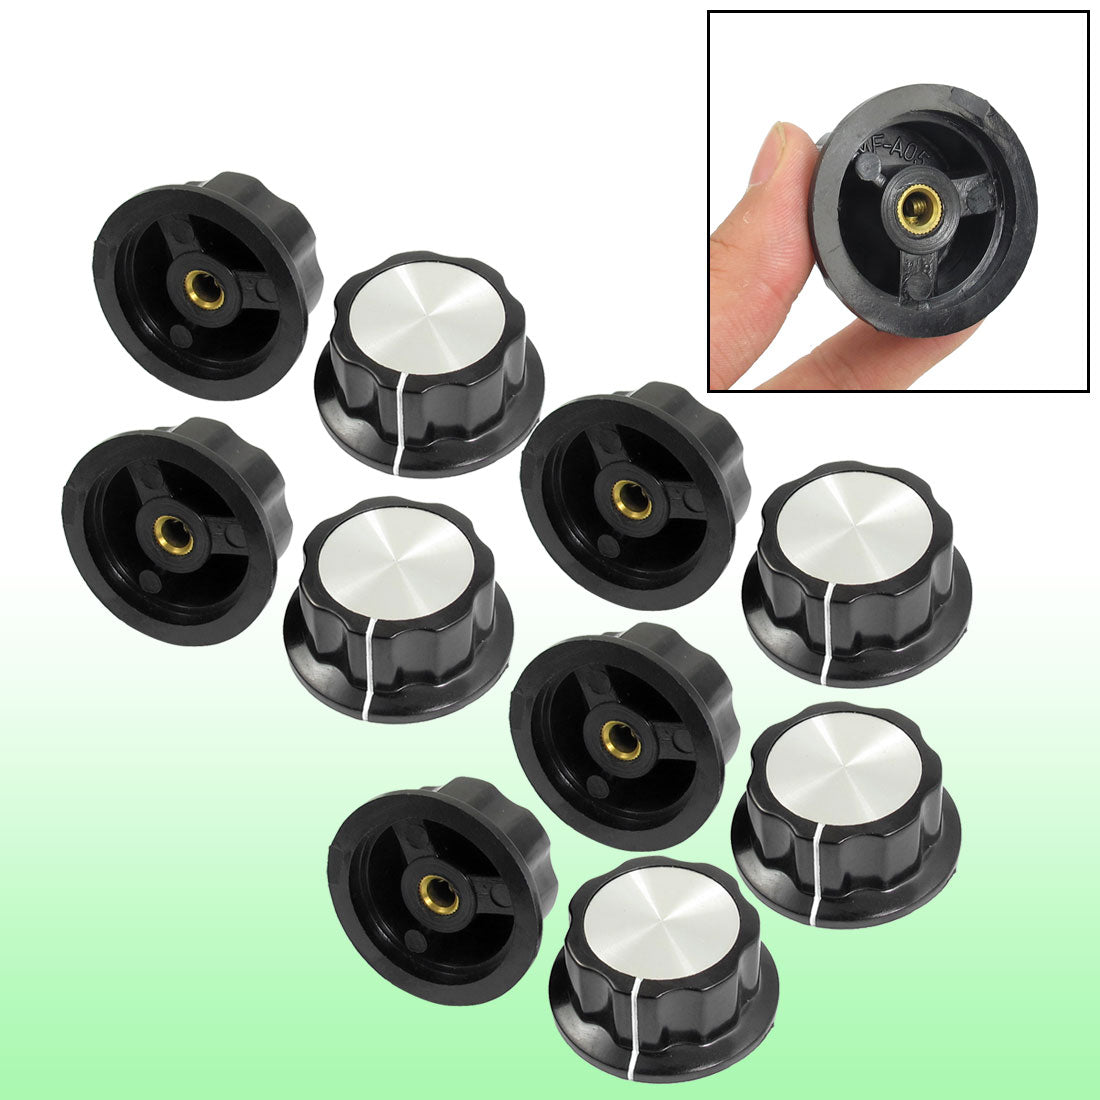 uxcell Uxcell 10 Pcs Black Silver Tone 36mm Top Rotary Knobs for 6mm Dia. Shaft Potentiometer